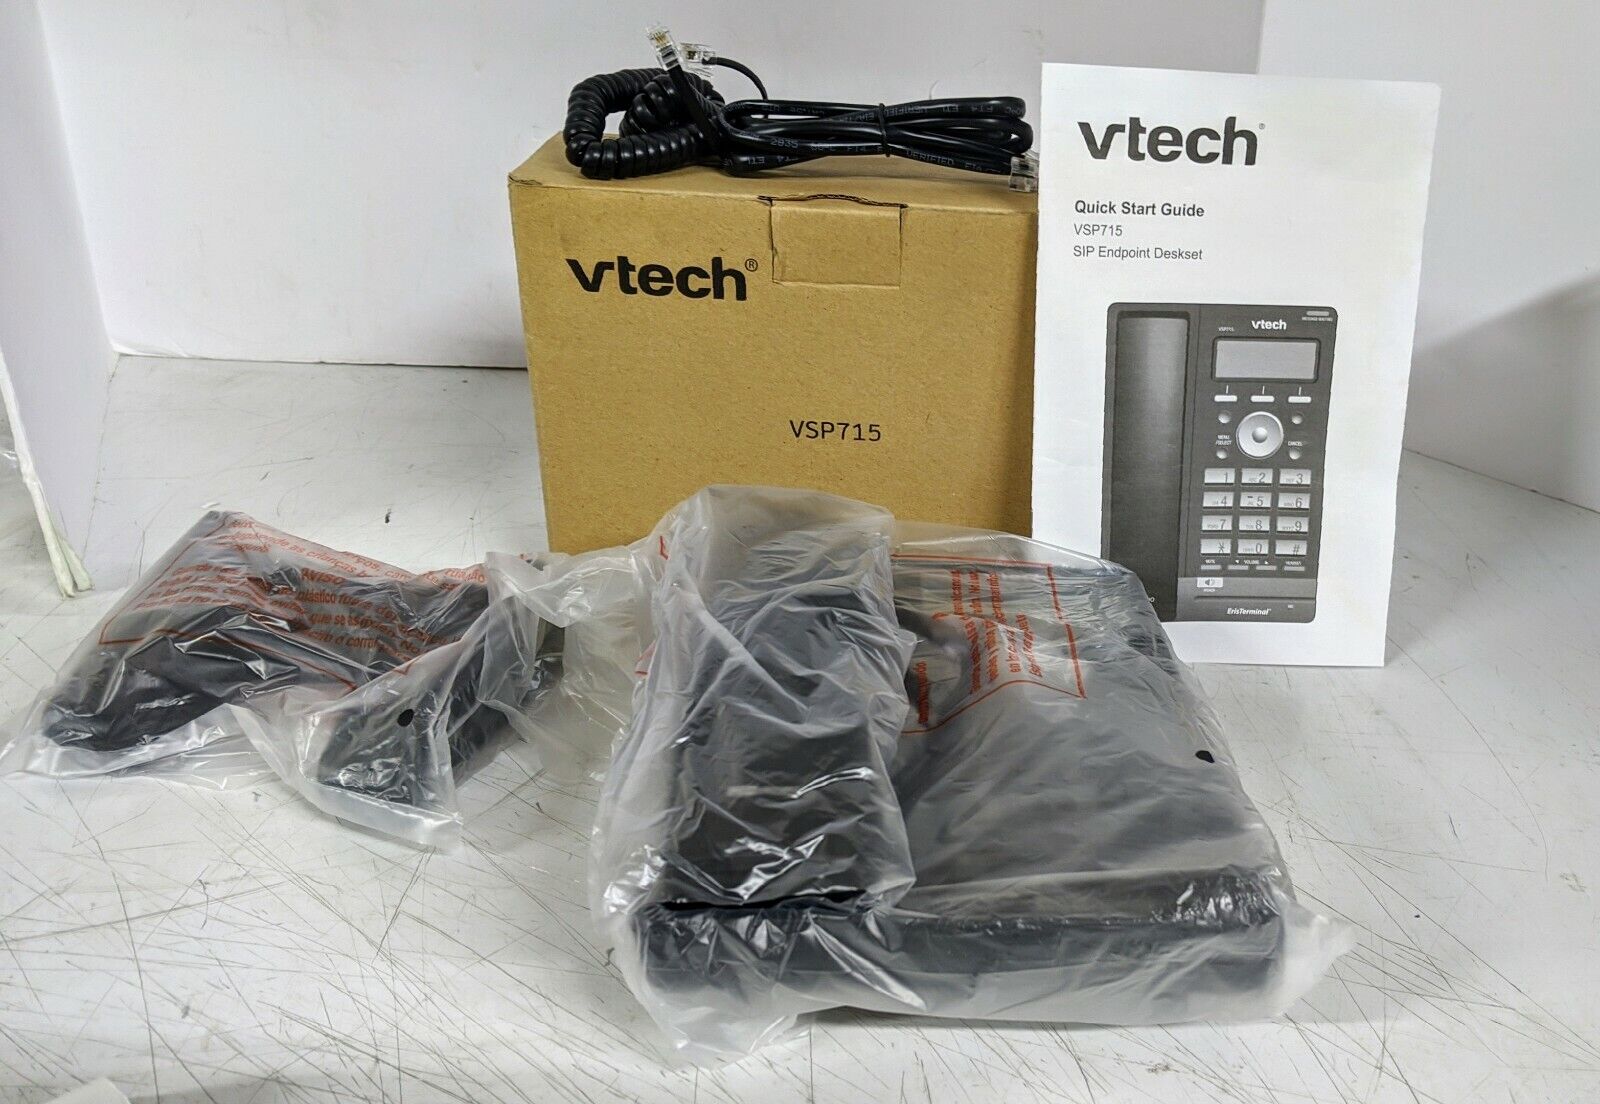 Vtech VSP715 ErisTerminal Deskset VoIP Phone and Device New in Box 